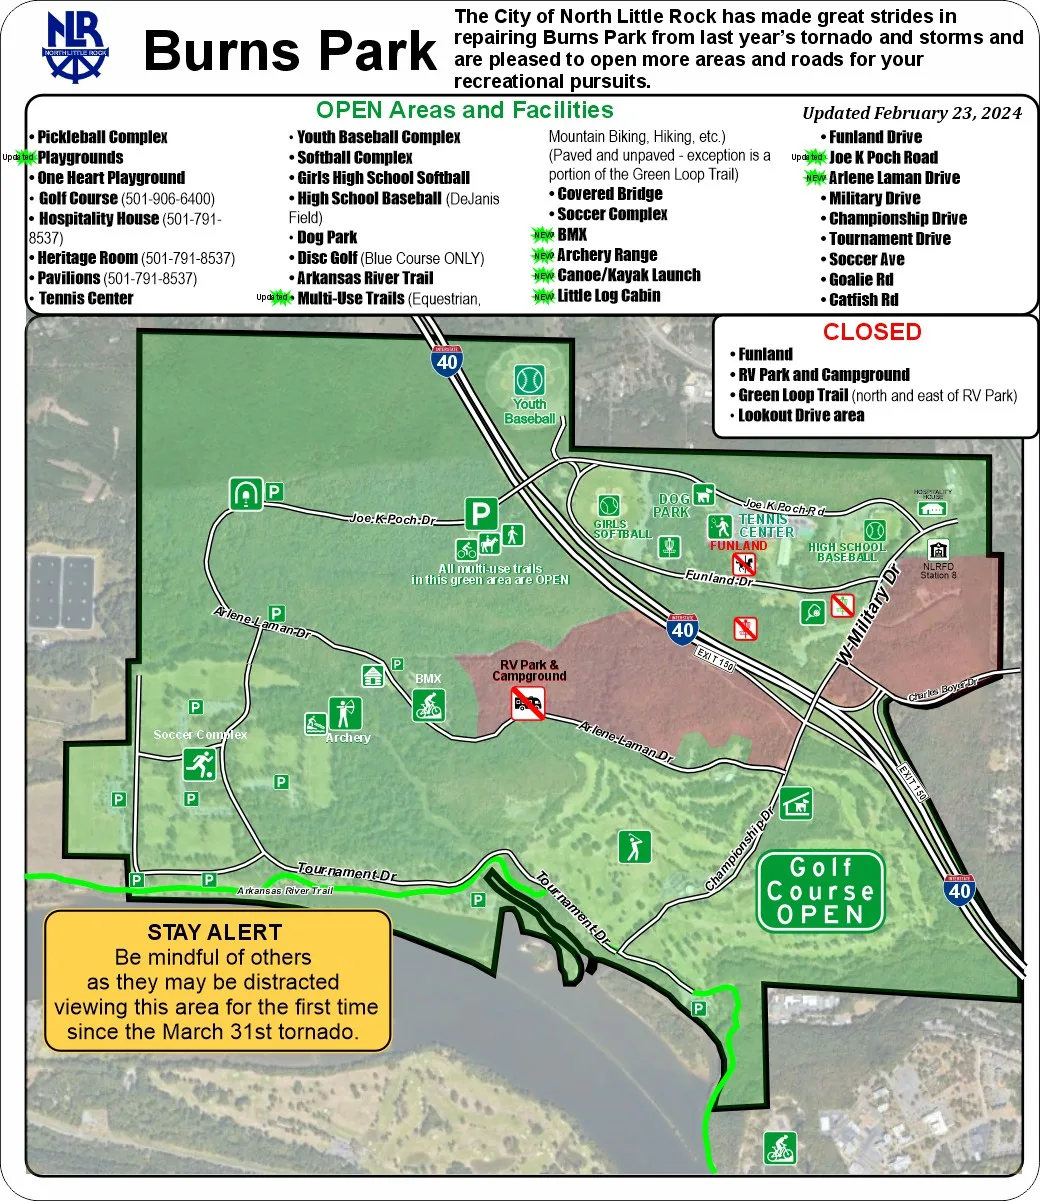 Map of open areas of Burns Park